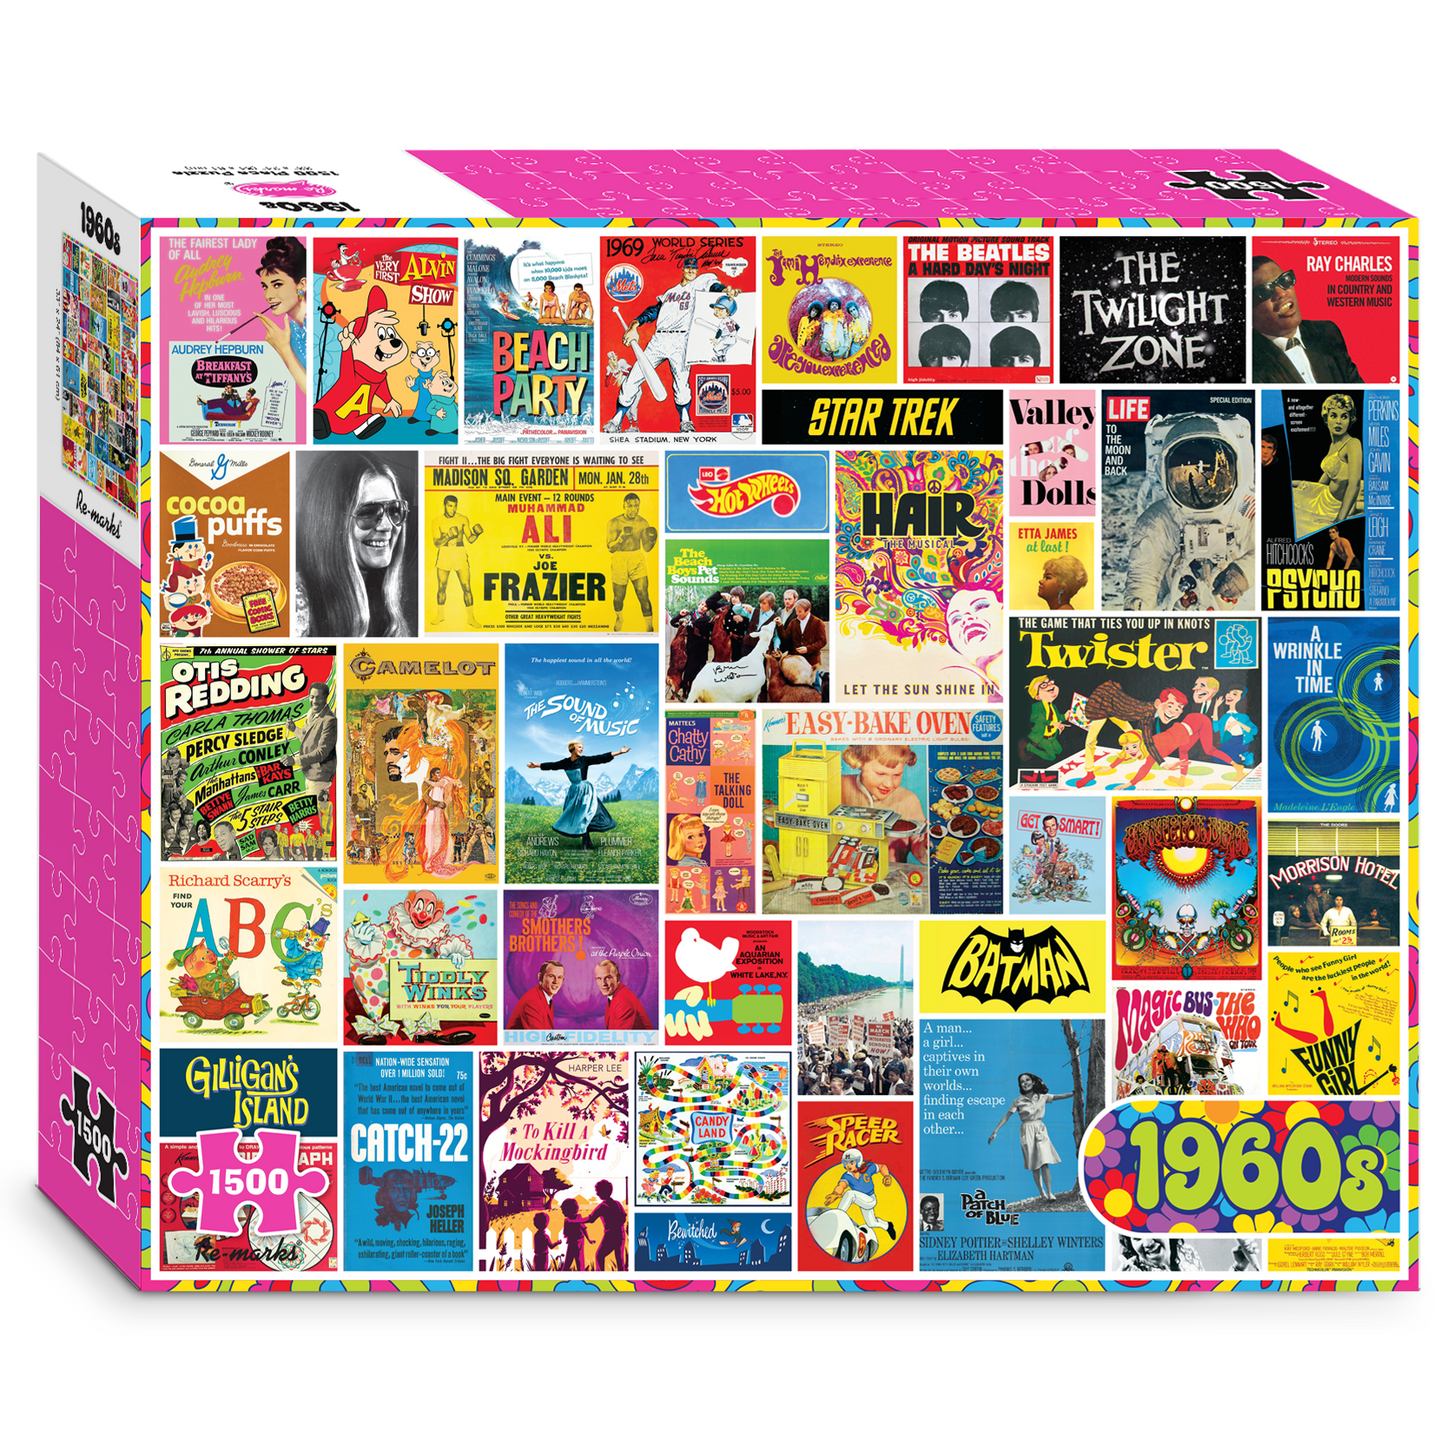 1960s Collage 1500-Piece Jigsaw Puzzle